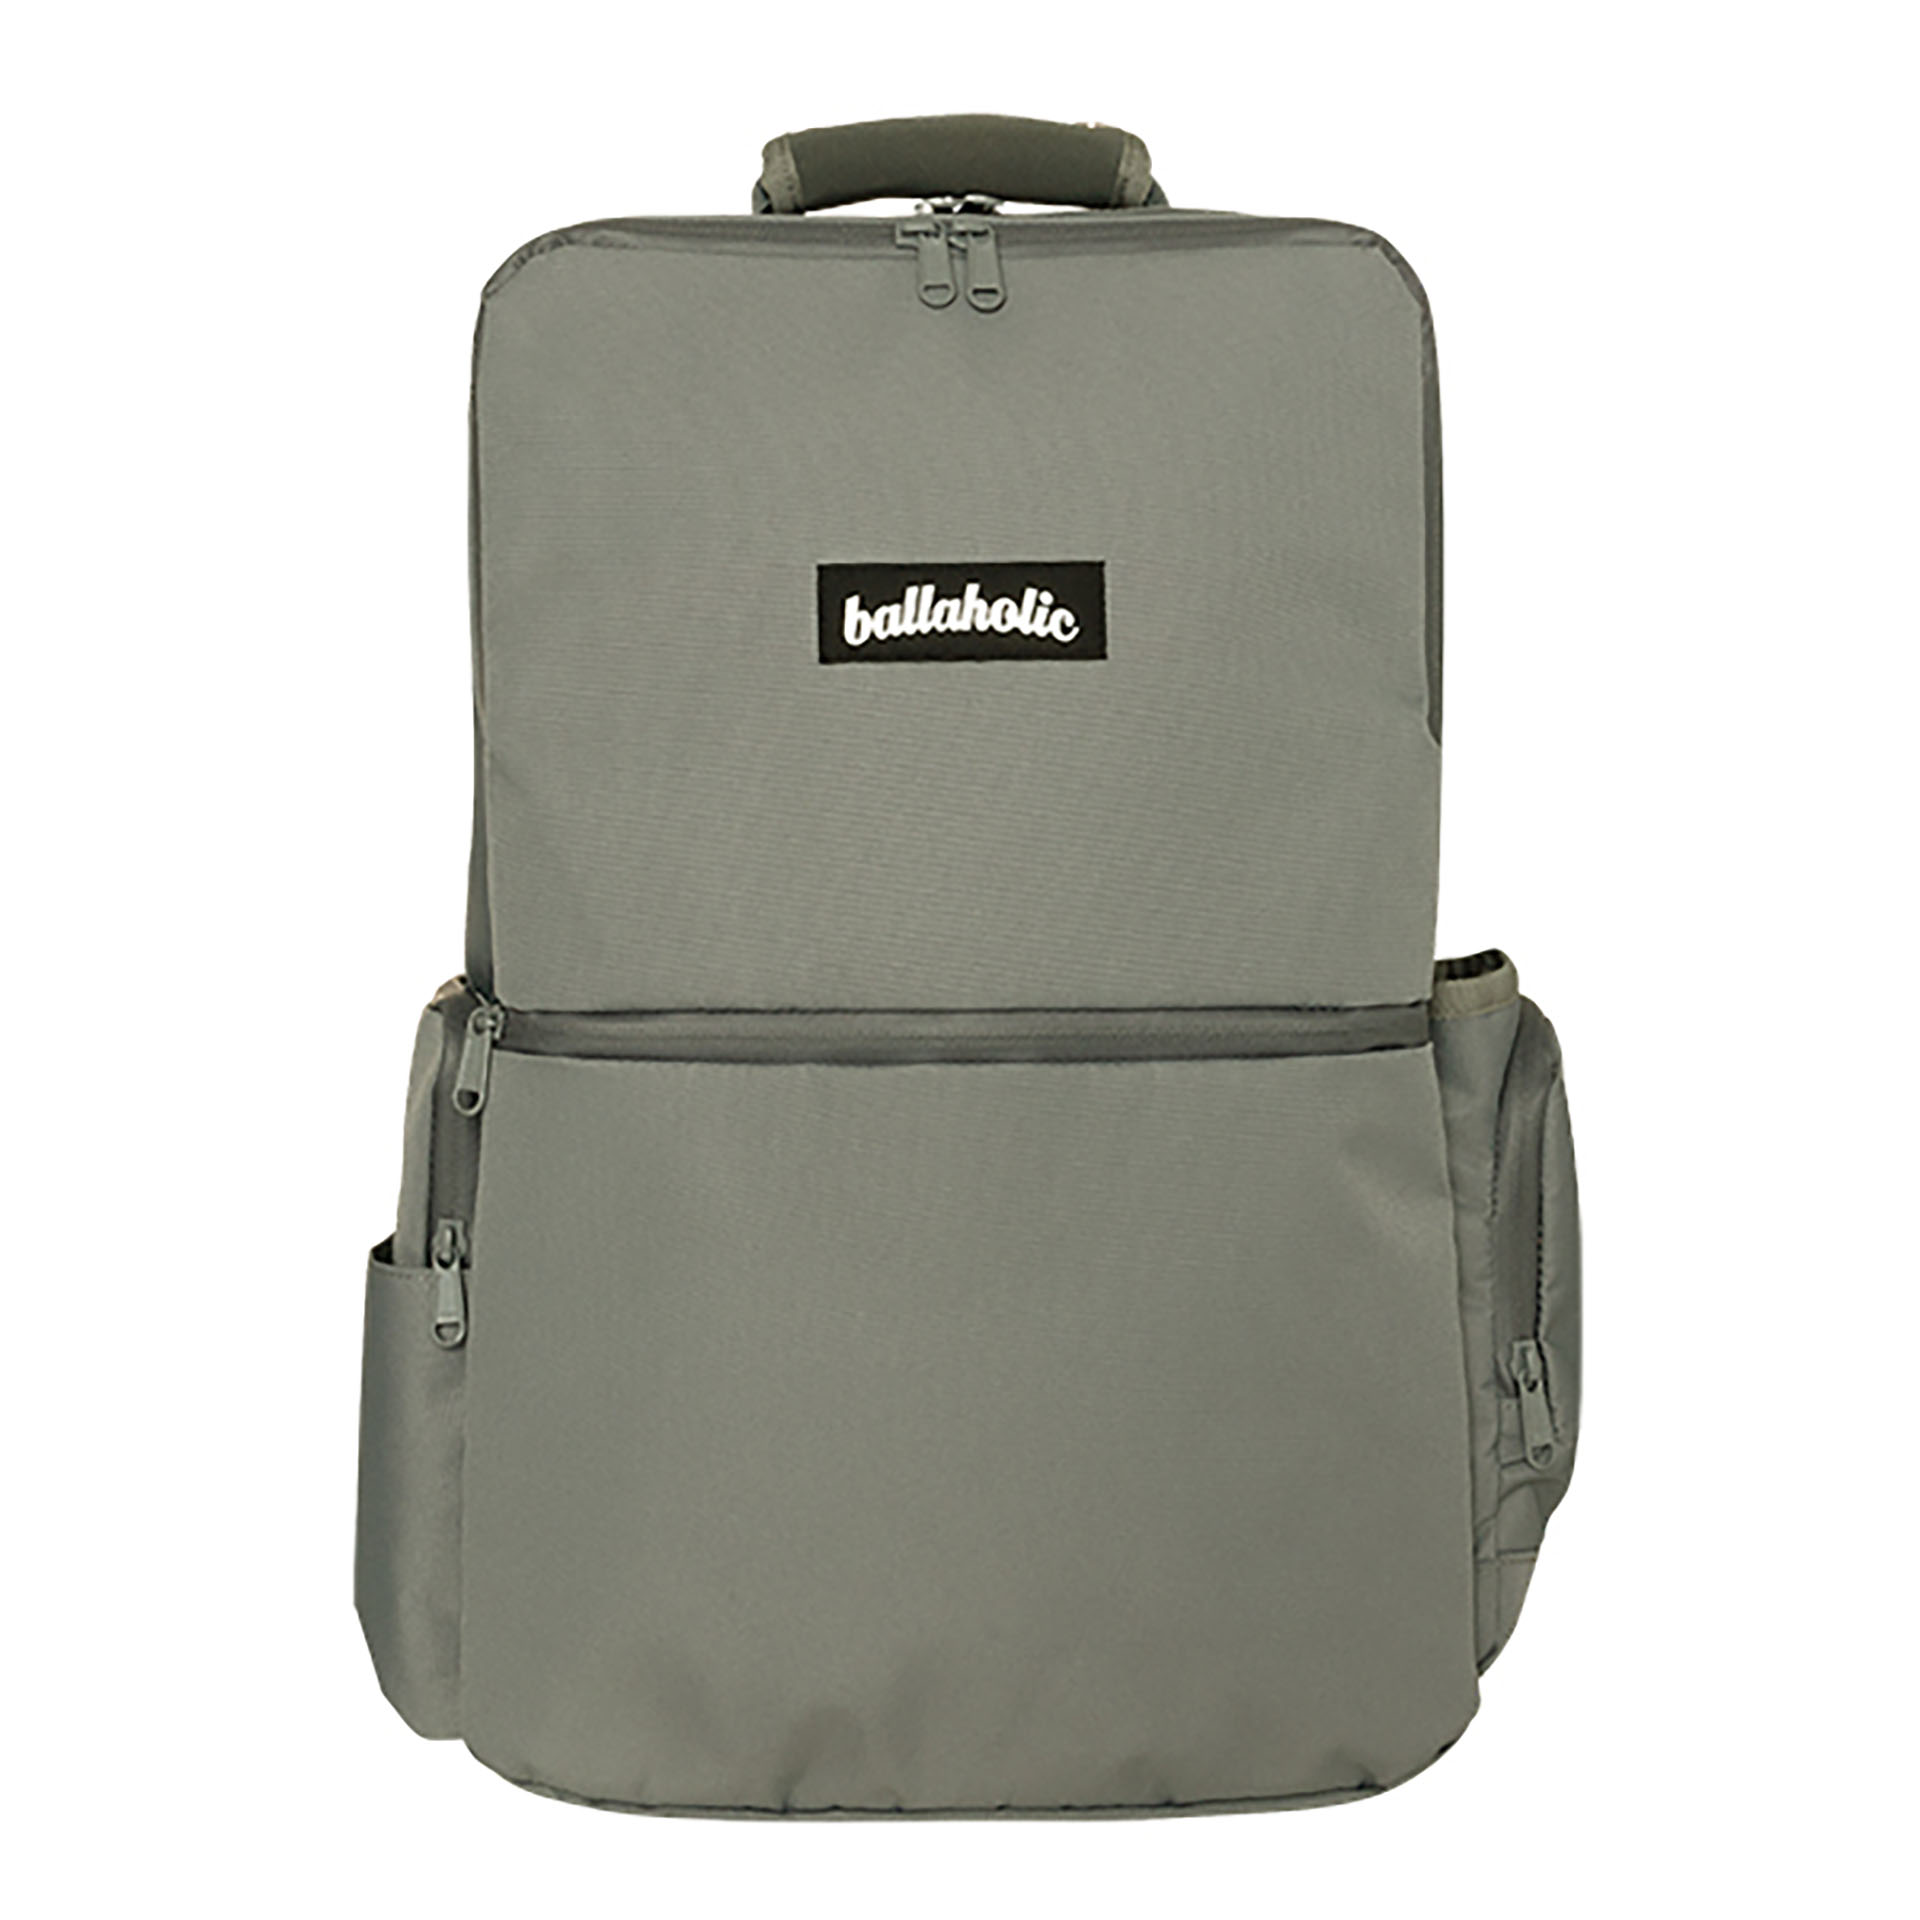 ballaholic city backpack バックパック